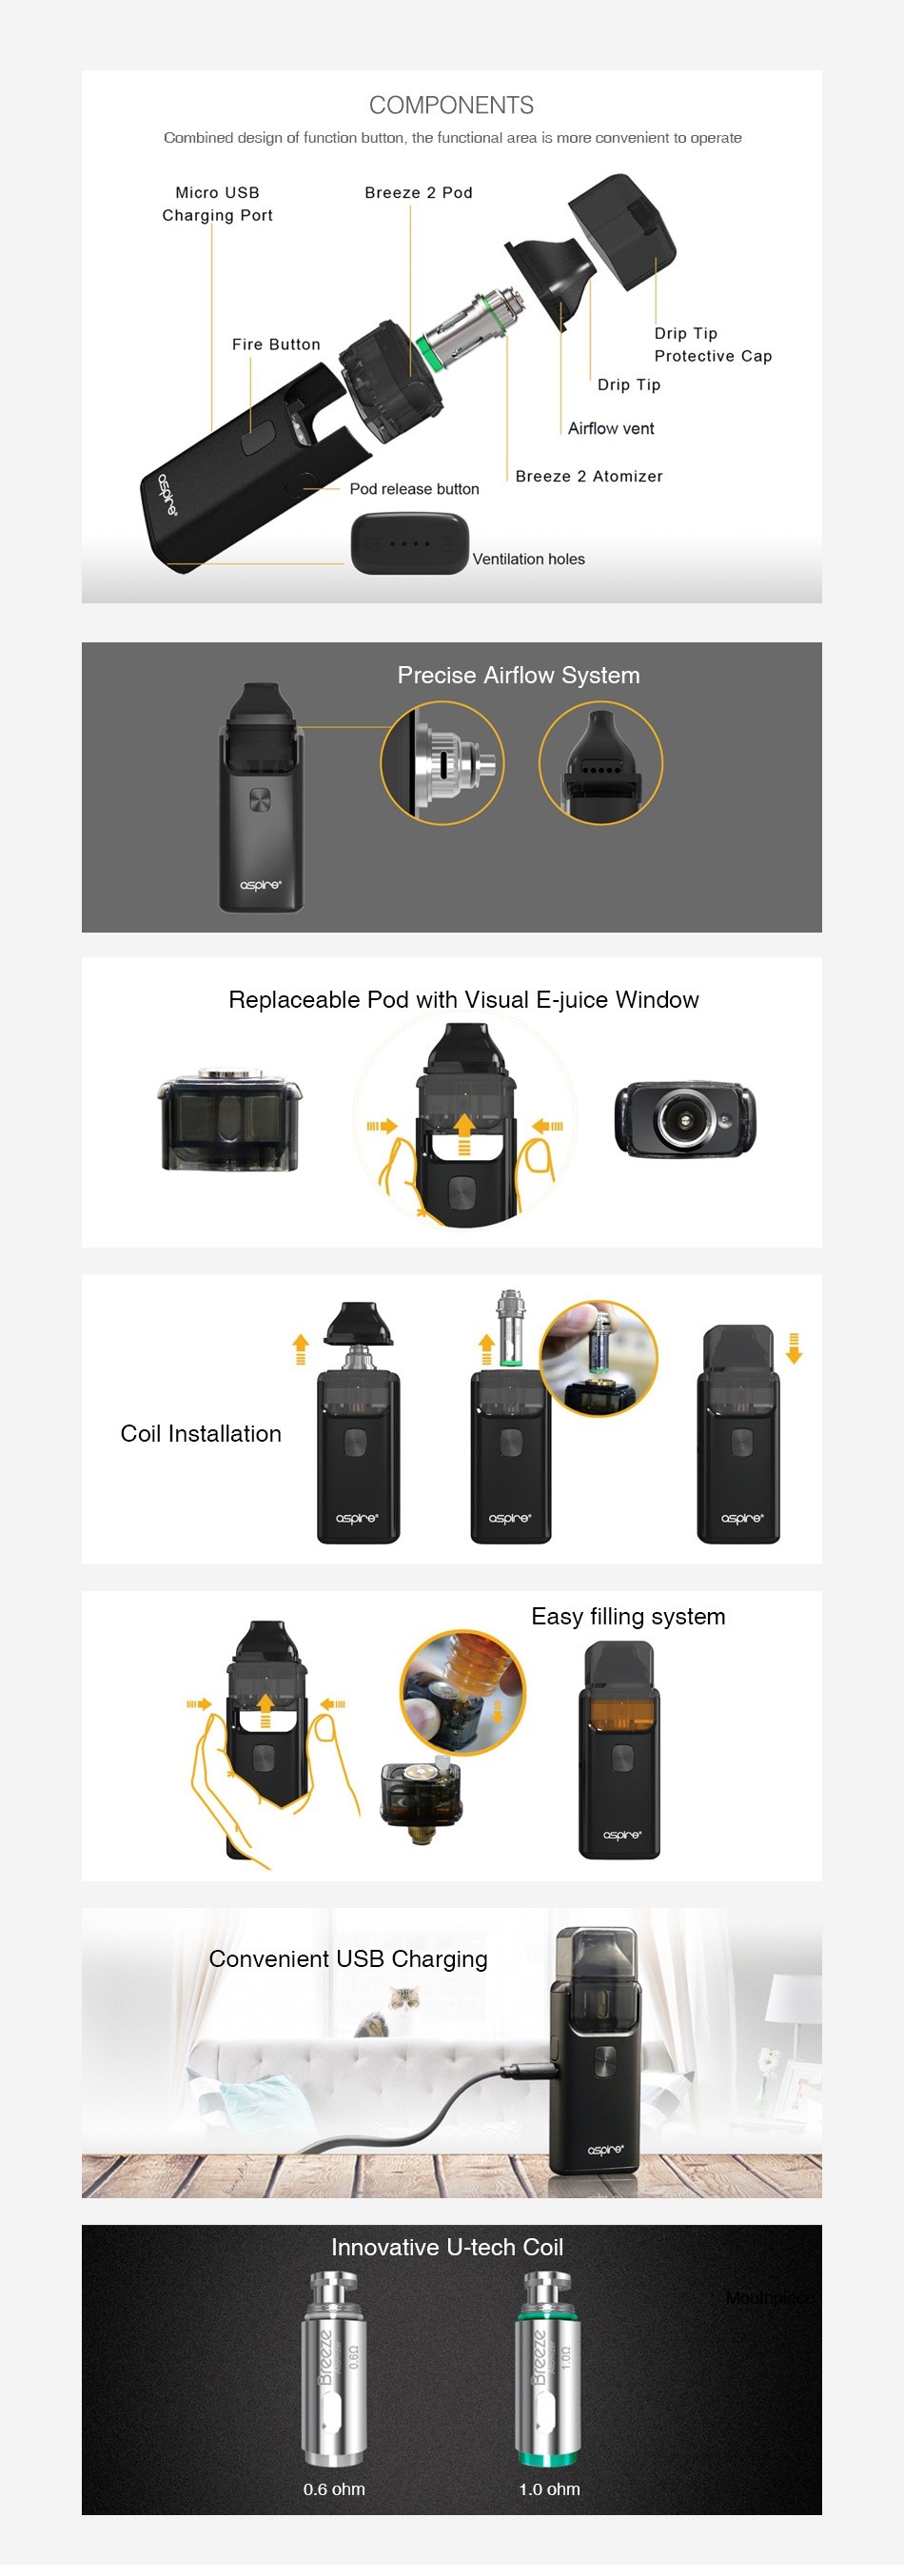 Aspire Breeze 2 AIO Starter Kit 1000mAh COMPONENTS Combined design of function bution the functional area is more conven ent to operat cro Breeze 2 Pod Charging por Fire Button Drip Tip Breeze 2 Atomize Pod release button Precise Airflow System Replaceable Pod with Visual E juice Window Easy filling system Convenient UsB Charging 7 Innovative U tech Coil